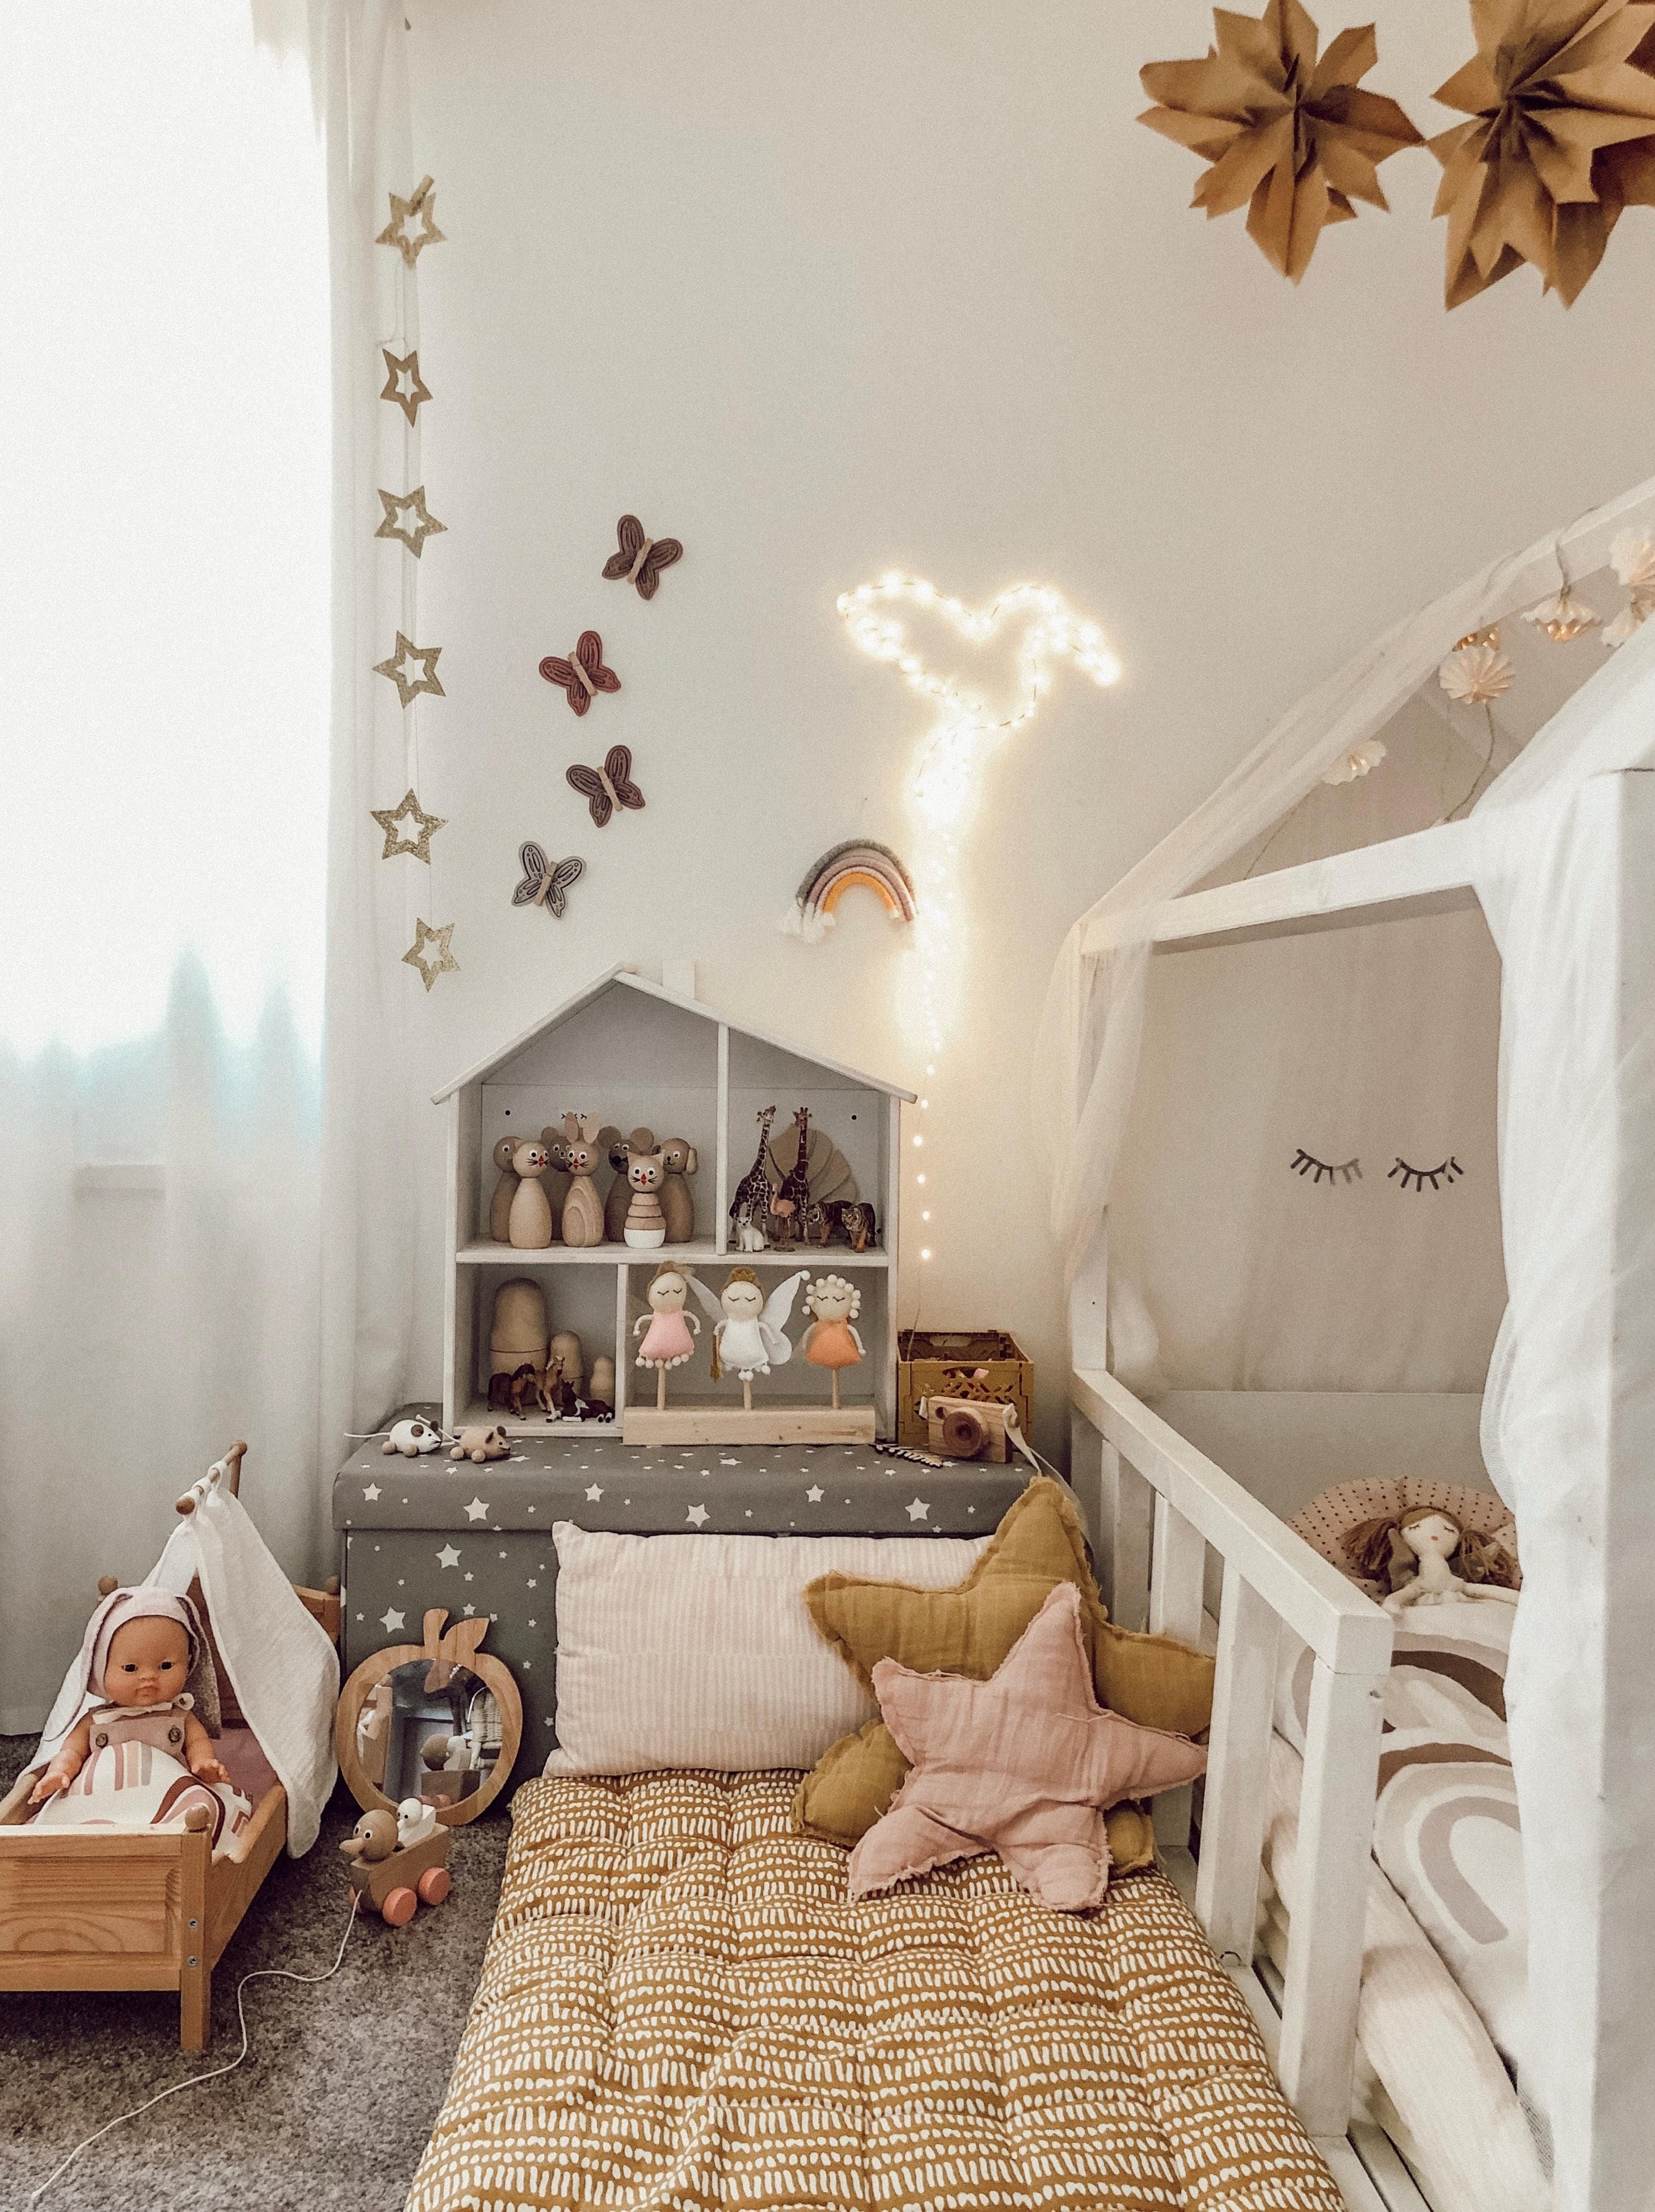 25 Dream - Look Like Bedroom Decorating Ideas For Your Kids - 85